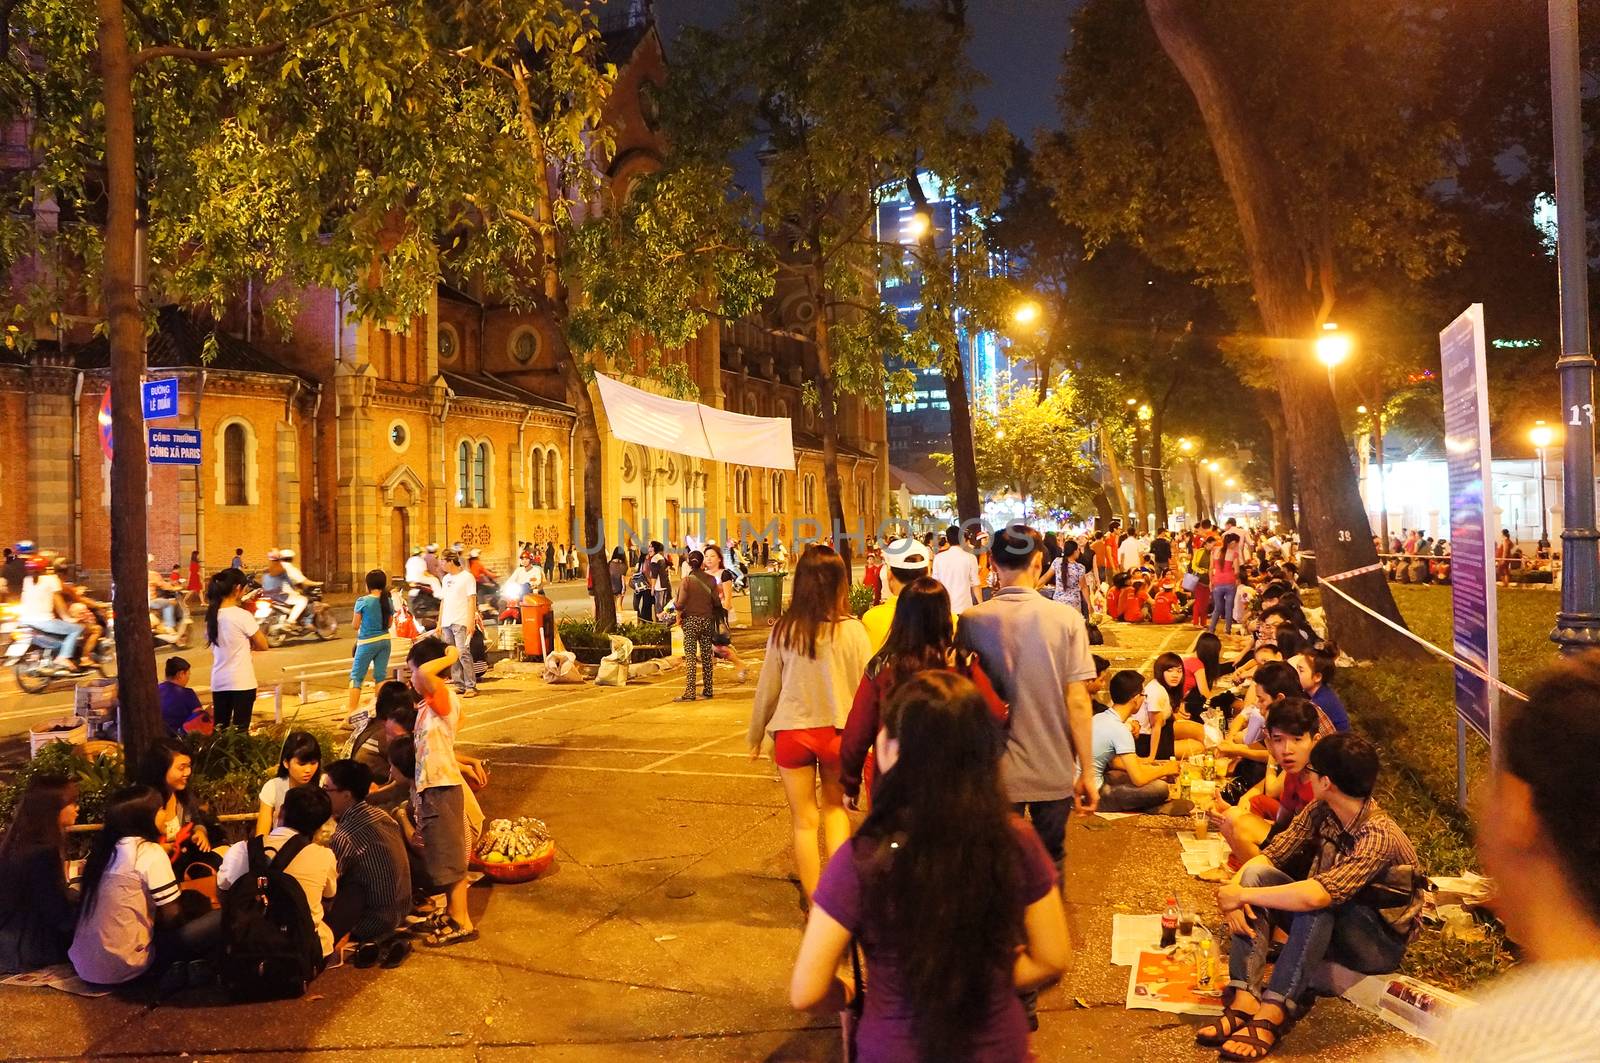 Crowded atmosphere, Ho Chi Minh youth lifestyle by xuanhuongho